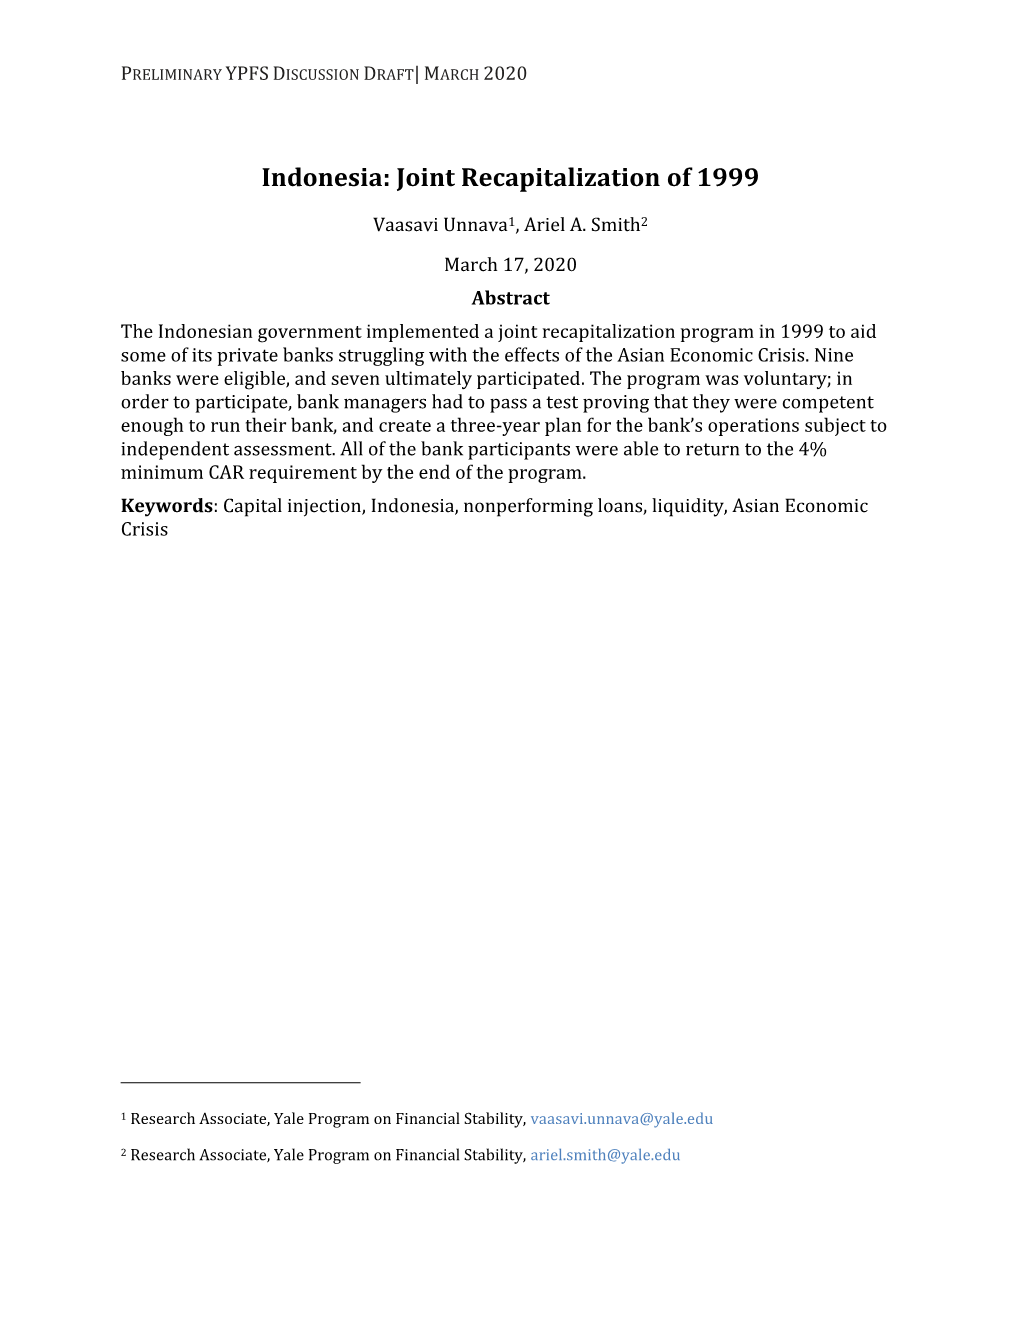 Indonesia: Joint Recapitalization of 1999